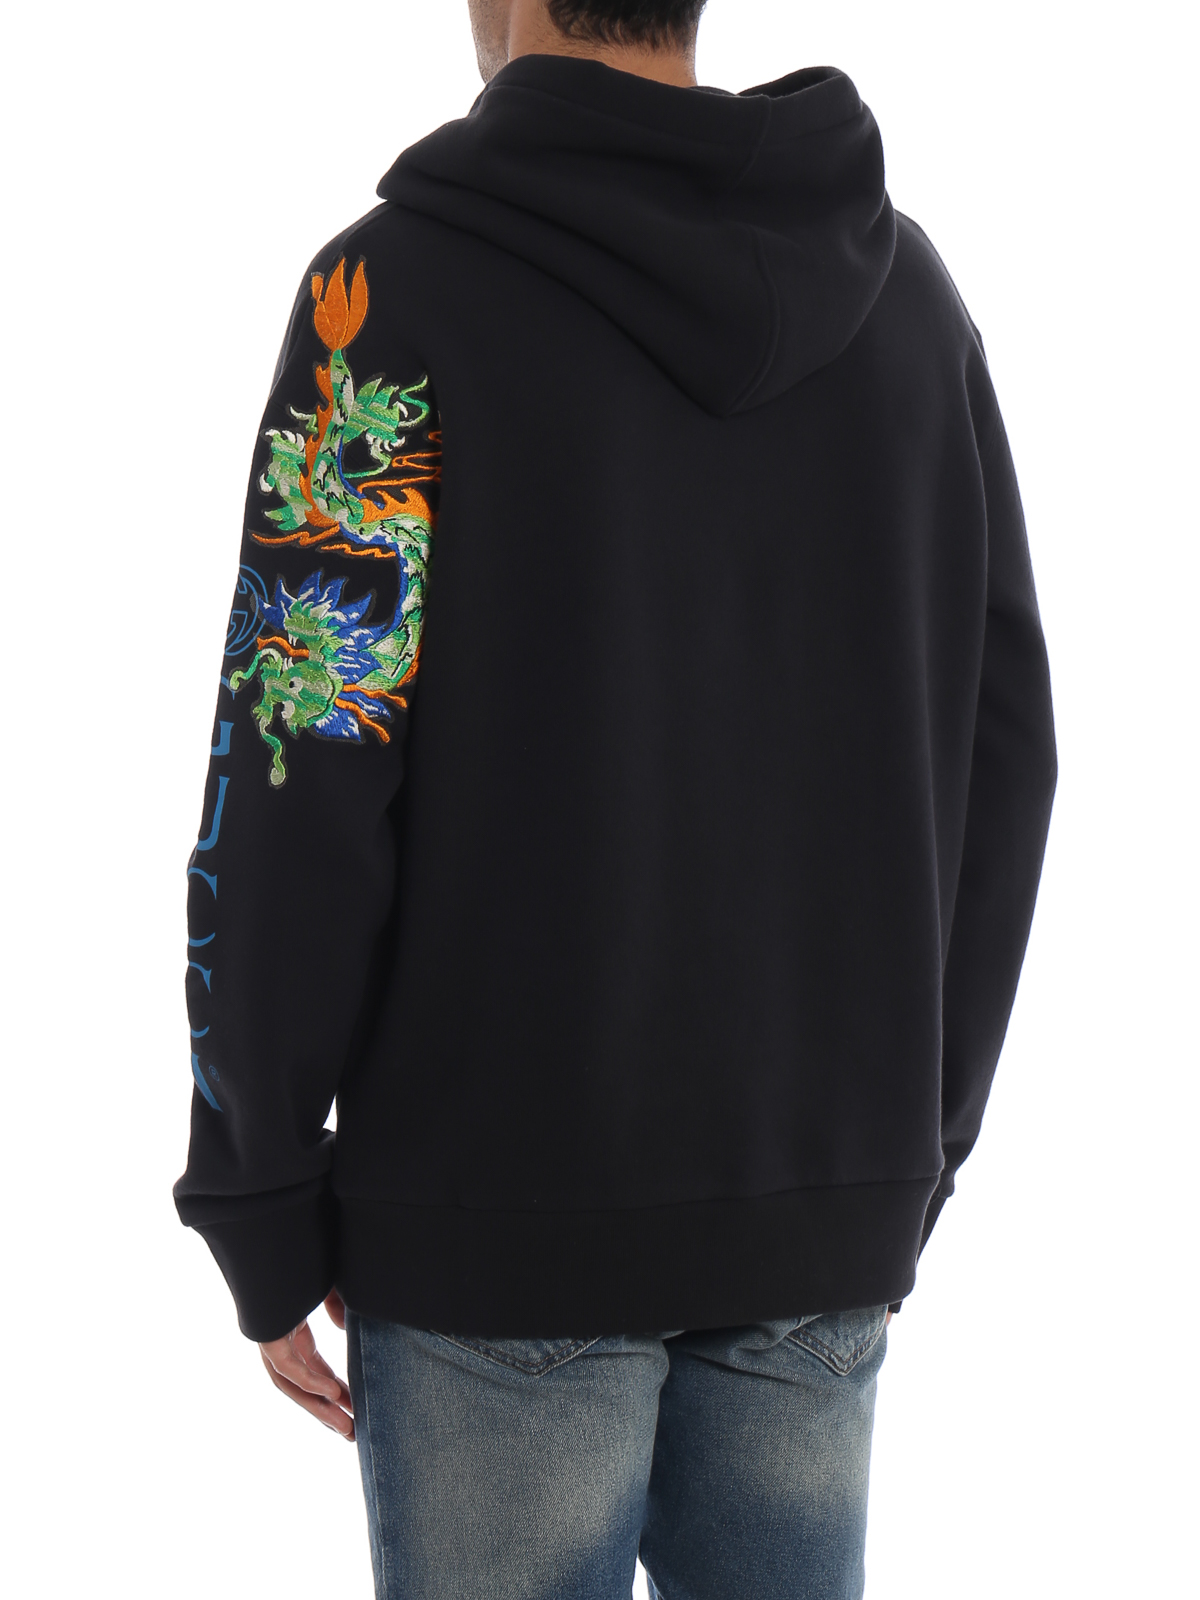 gucci hoodie with dragon